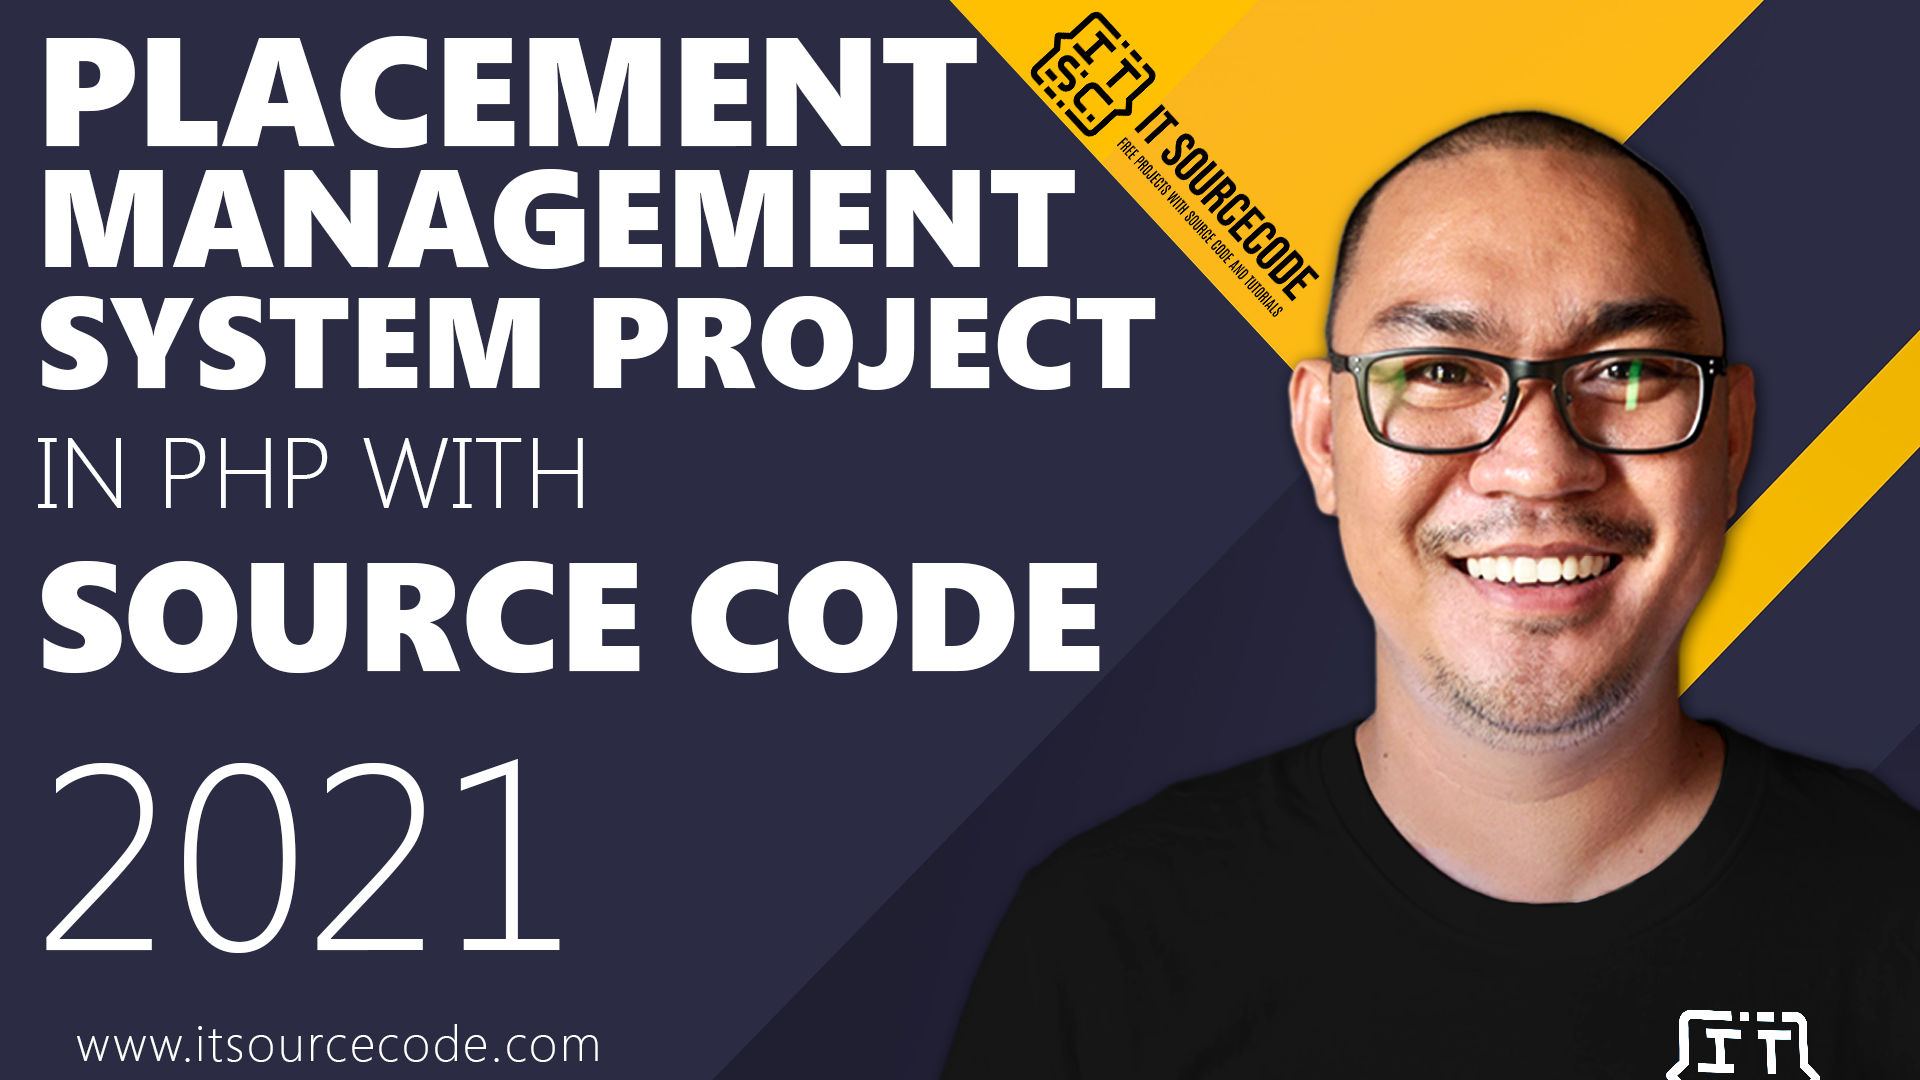 Placement Management System Project In PHP With Source Code